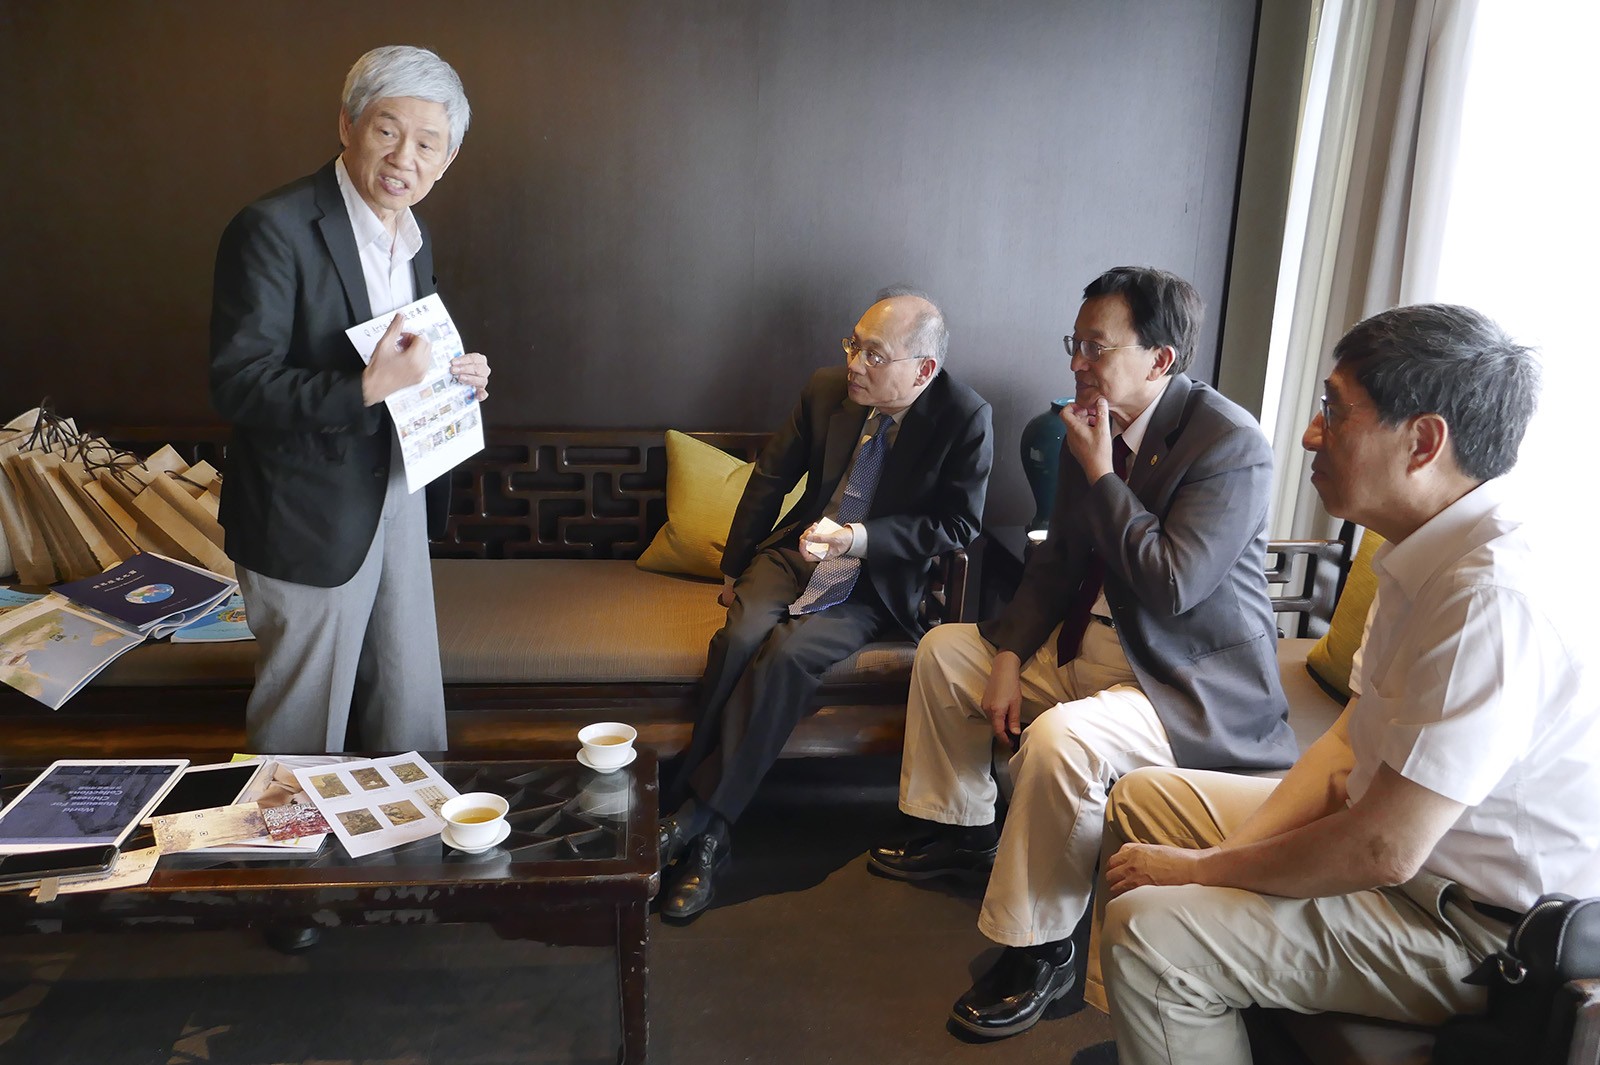 (From right) Professor Kuo, President of CityU; Professor Chang, President of NCTU; and Mr Wu, Director of NPM discuss how to collaborate on the project “Digitising Palace Museum”. Professor Li, Chair Professor of the Institute of Information Management at NCTU, presents the main objectives of the project.